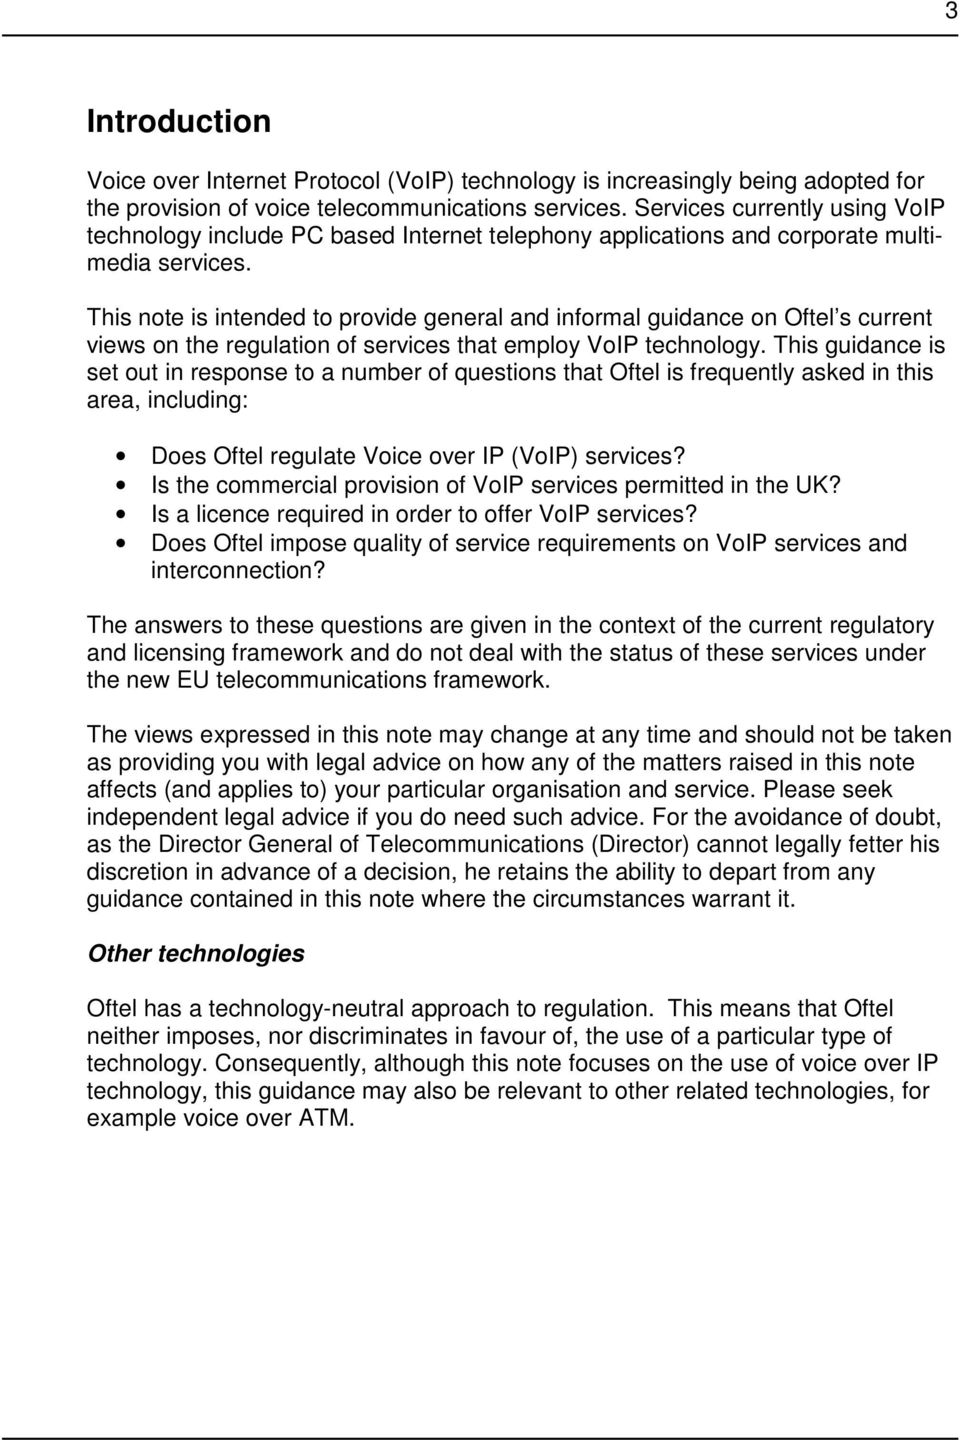 This note is intended to provide general and informal guidance on Oftel s current views on the regulation of services that employ VoIP technology.